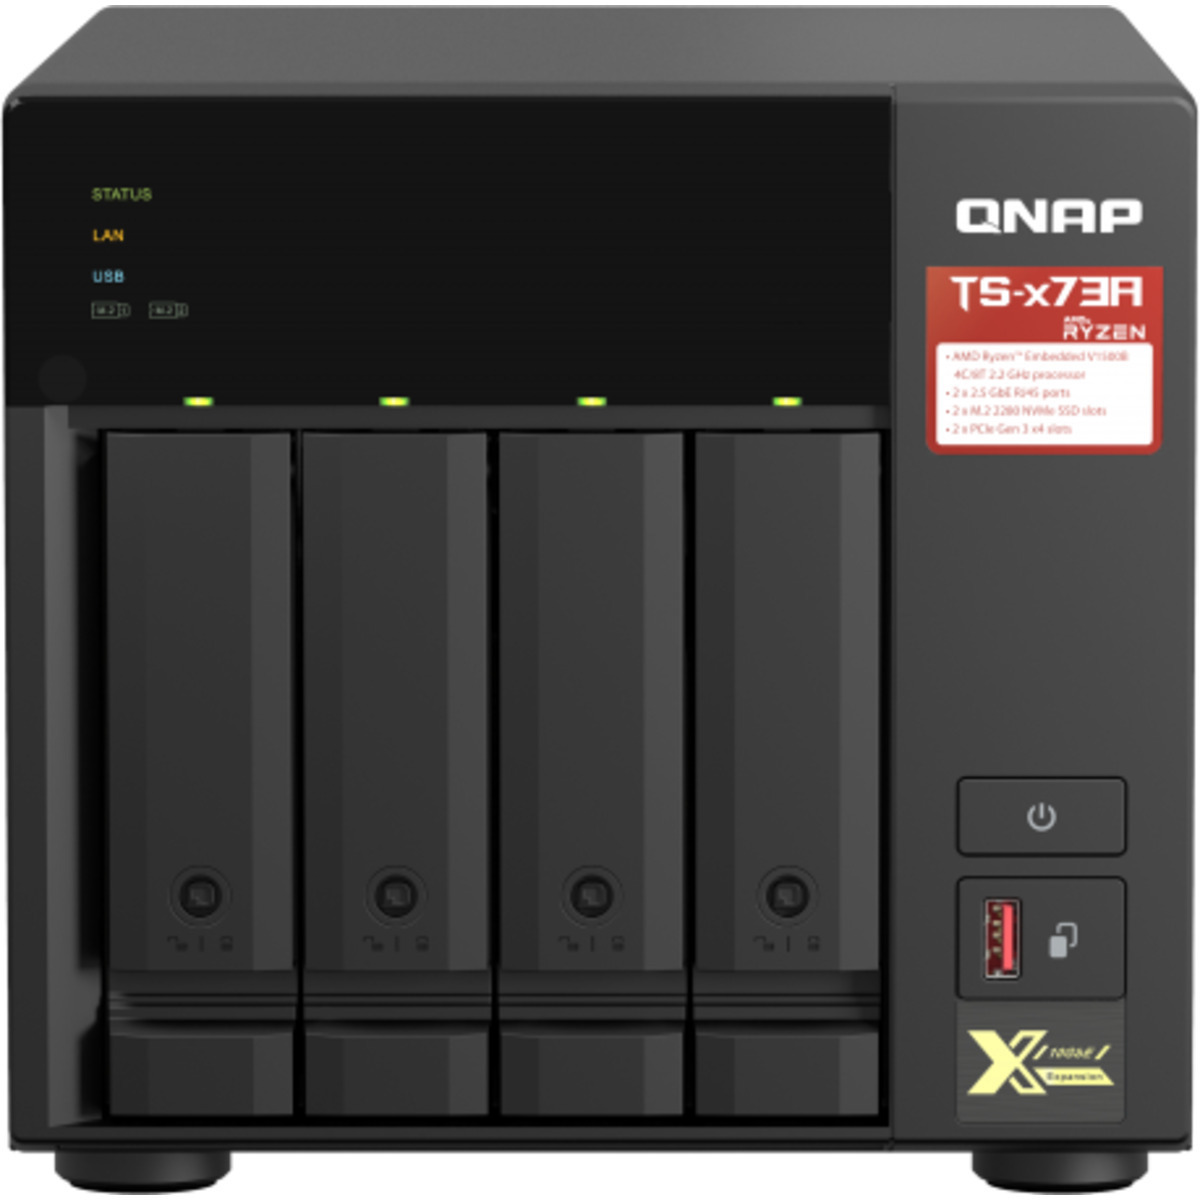 buy QNAP TS-473A 64tb Desktop NAS - Network Attached Storage Device 4x16000gb Seagate IronWolf Pro ST16000NT001 3.5 7200rpm SATA 6Gb/s HDD NAS Class Drives Installed - Burn-In Tested - ON SALE - nas headquarters buy network attached storage server device das new raid-5 free shipping simply usa christmas holiday black friday cyber monday week sale happening now! TS-473A